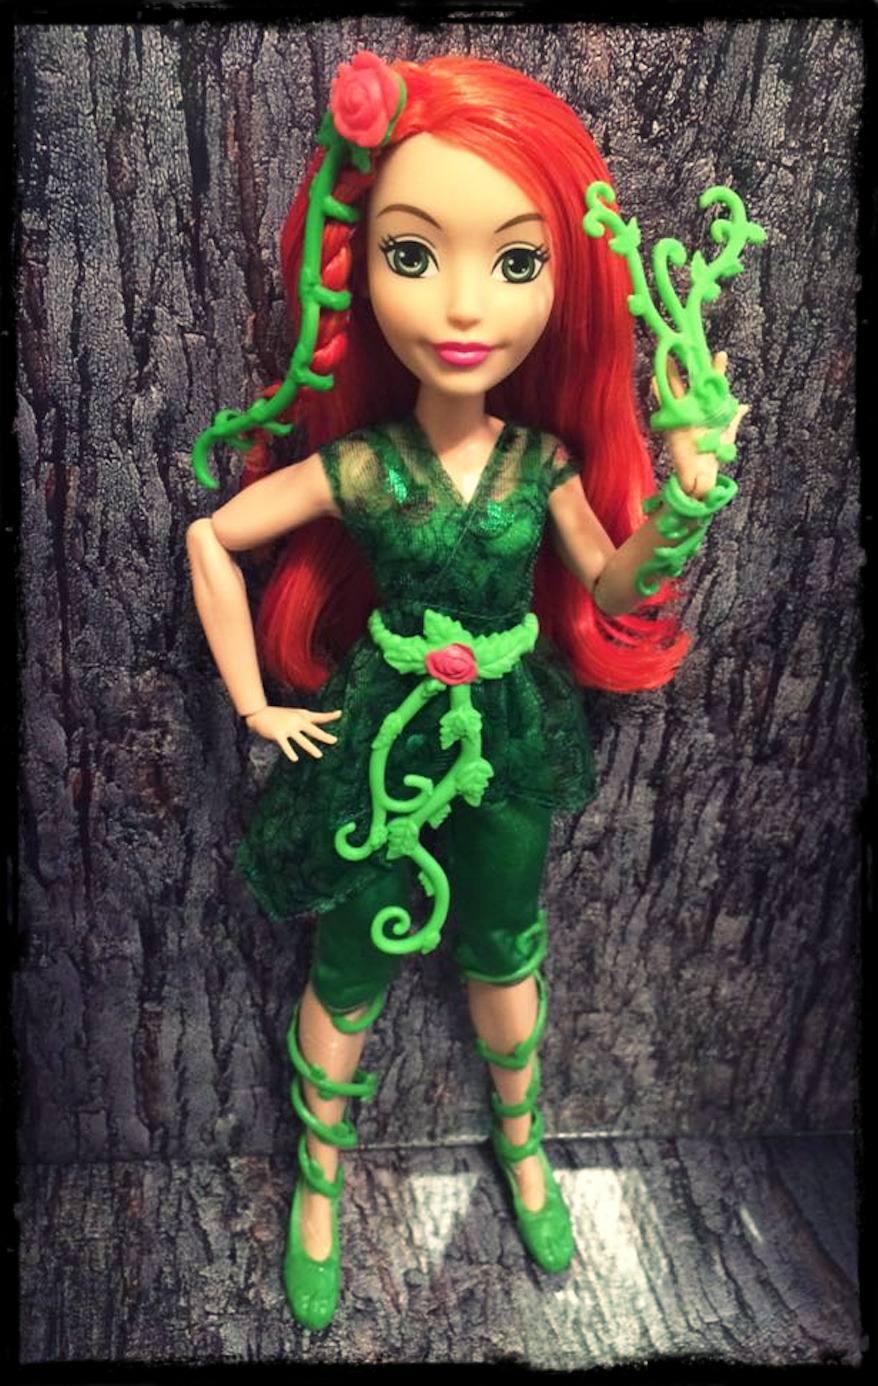 DC Super Hero Girls&rsquo; Poison Ivy™!Learn about her: Poison Ivy, aka &ldquo;Ivy&rdquo;, is a genius when it comes to the biology and plants. Being shy and far more comfortable with plants than people, Ivy spends most of her time in the Super Hero High greenhouse. While she has the power to control plants, they can sometimes get out of hand.Super Powers: Genius Level Intellect, Summons and Controls Plants.